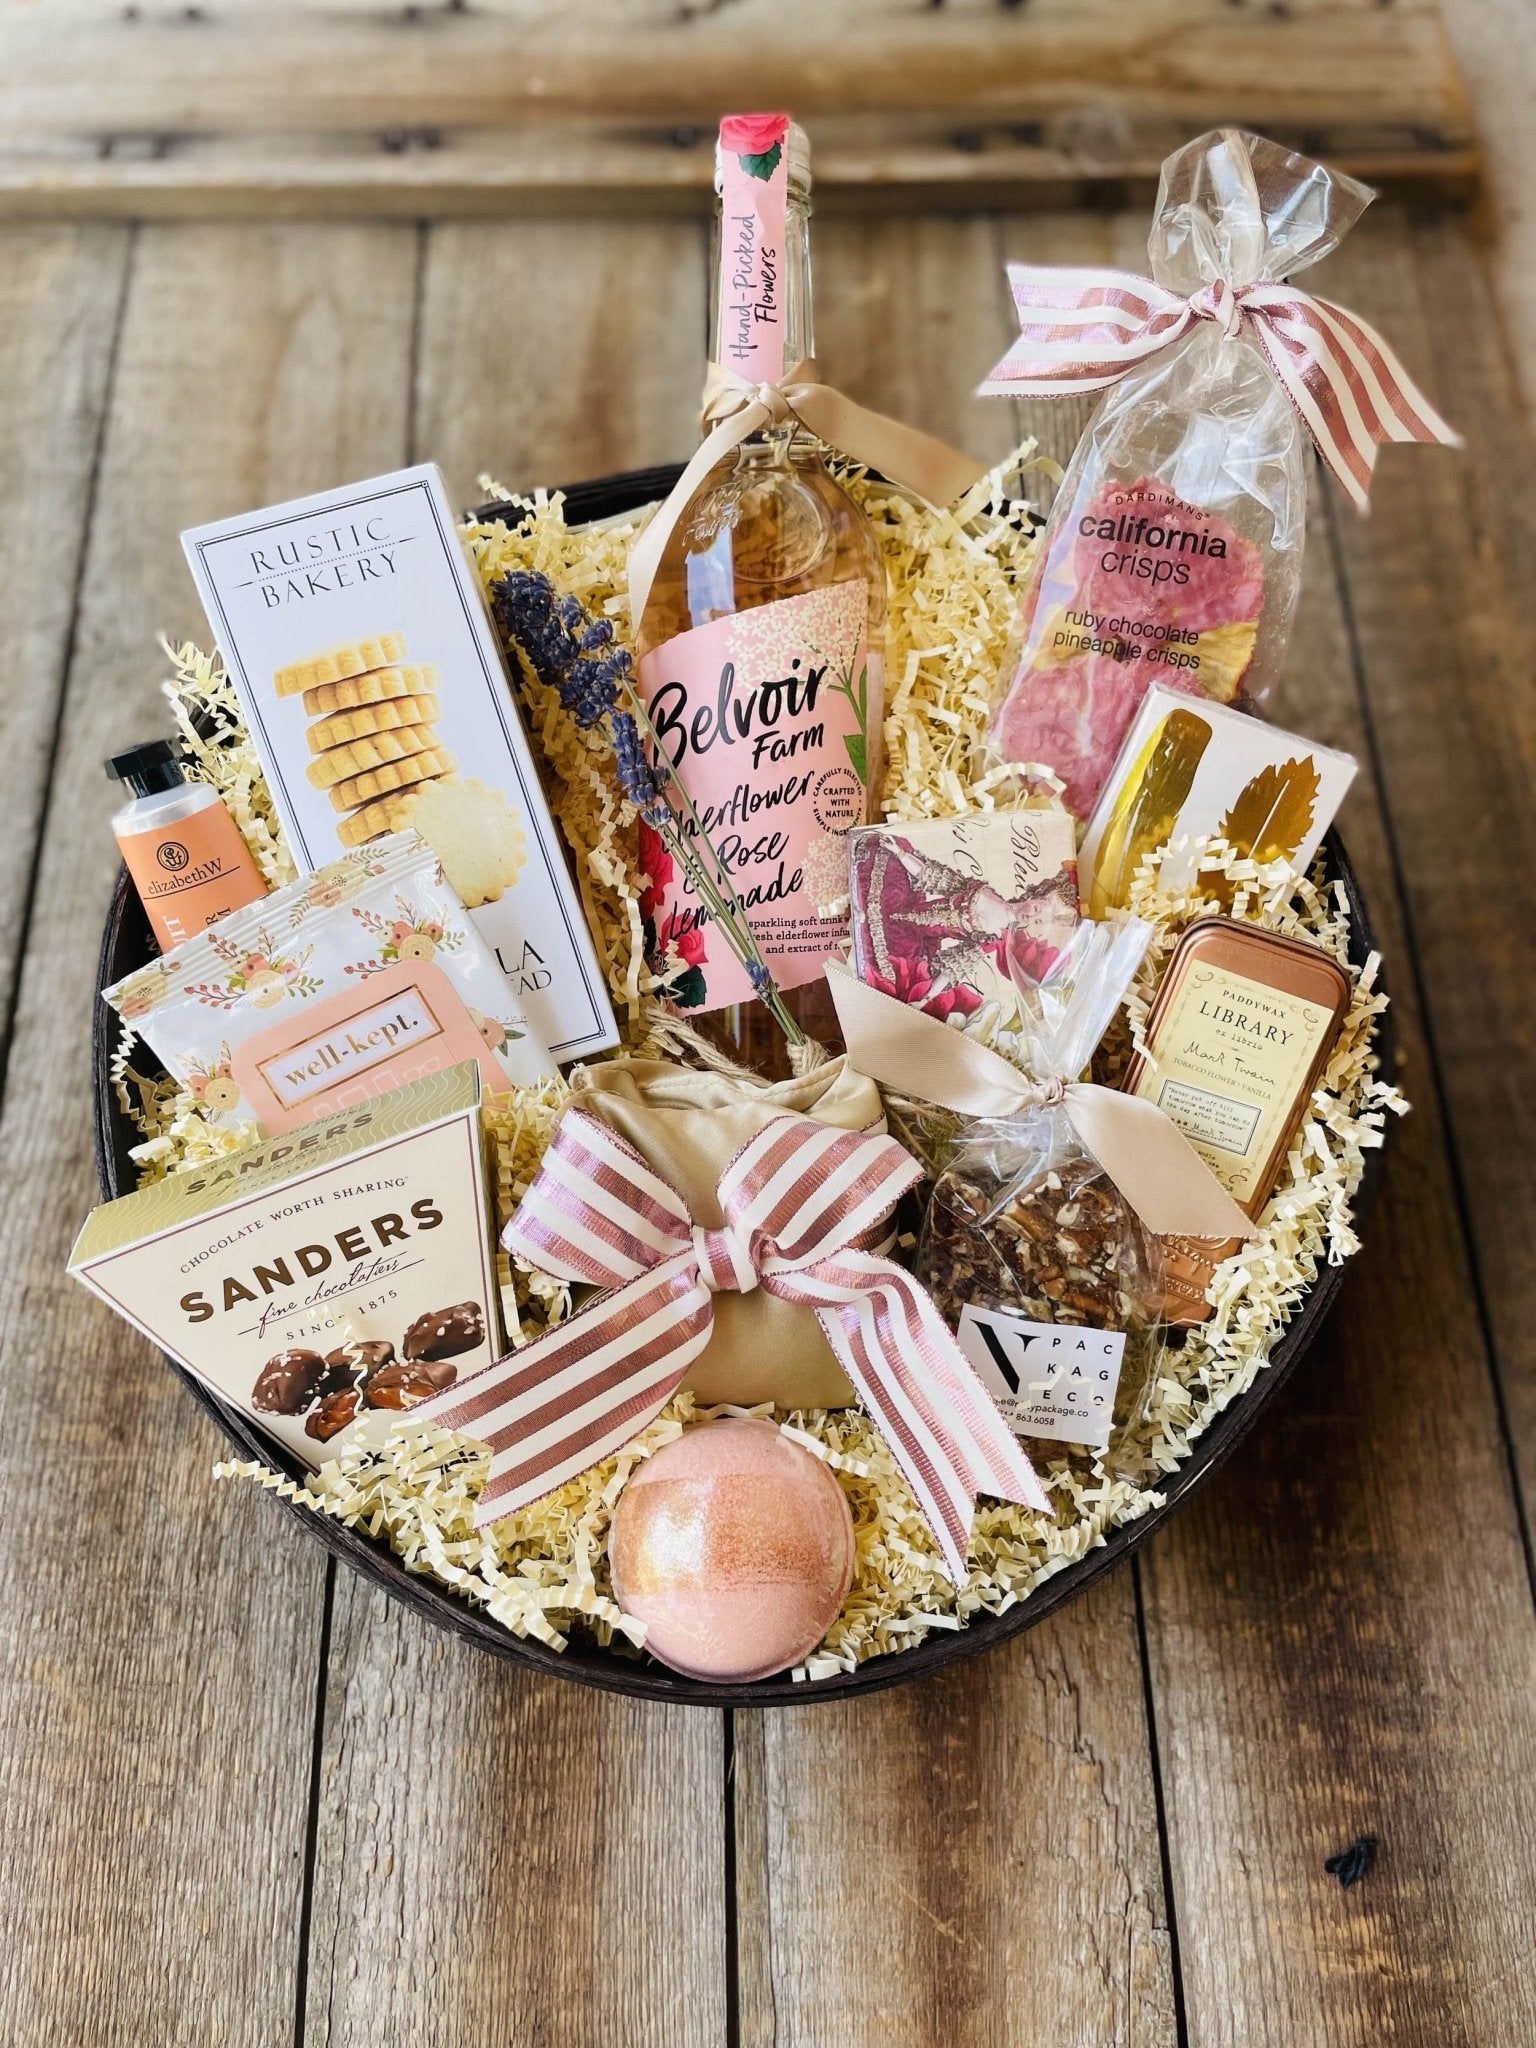 7 surprising facts about ordering a gourmet gift basket! - Nifty Package Co